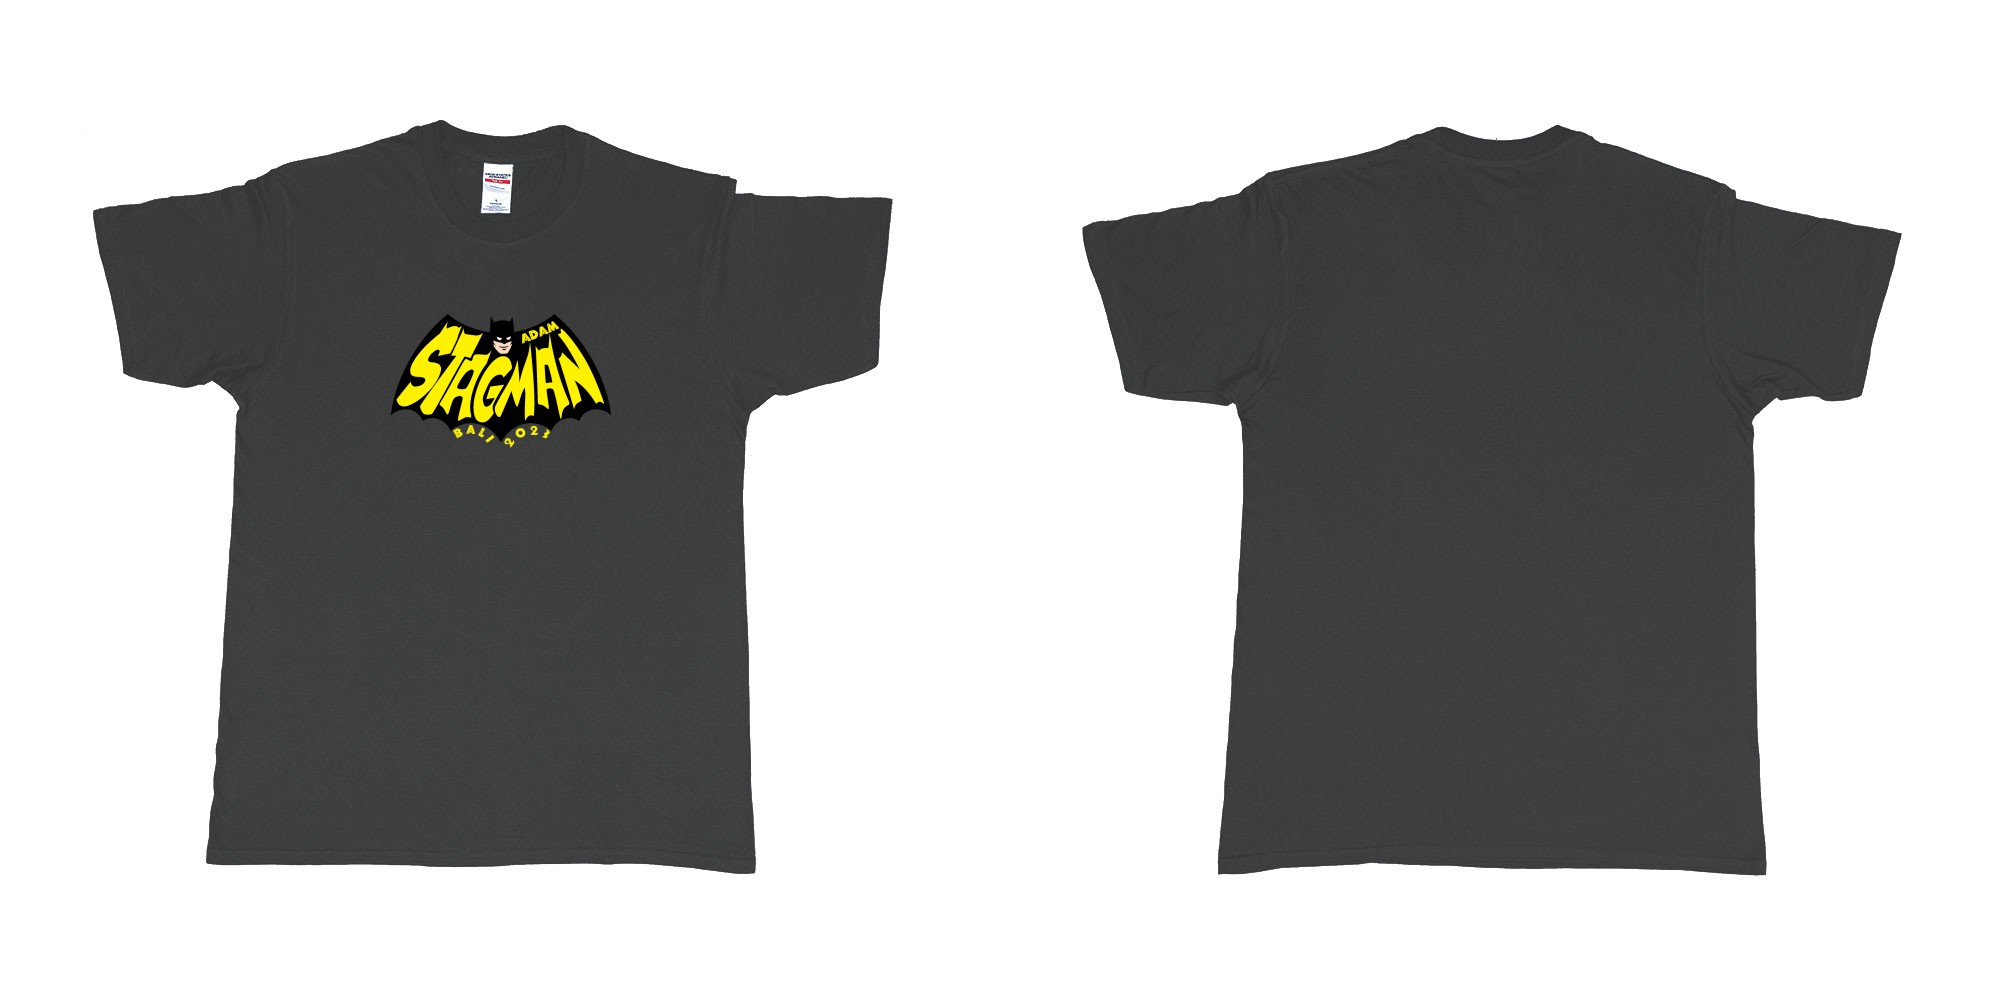 Custom tshirt design Batman StagMan Old School in fabric color black choice your own text made in Bali by The Pirate Way